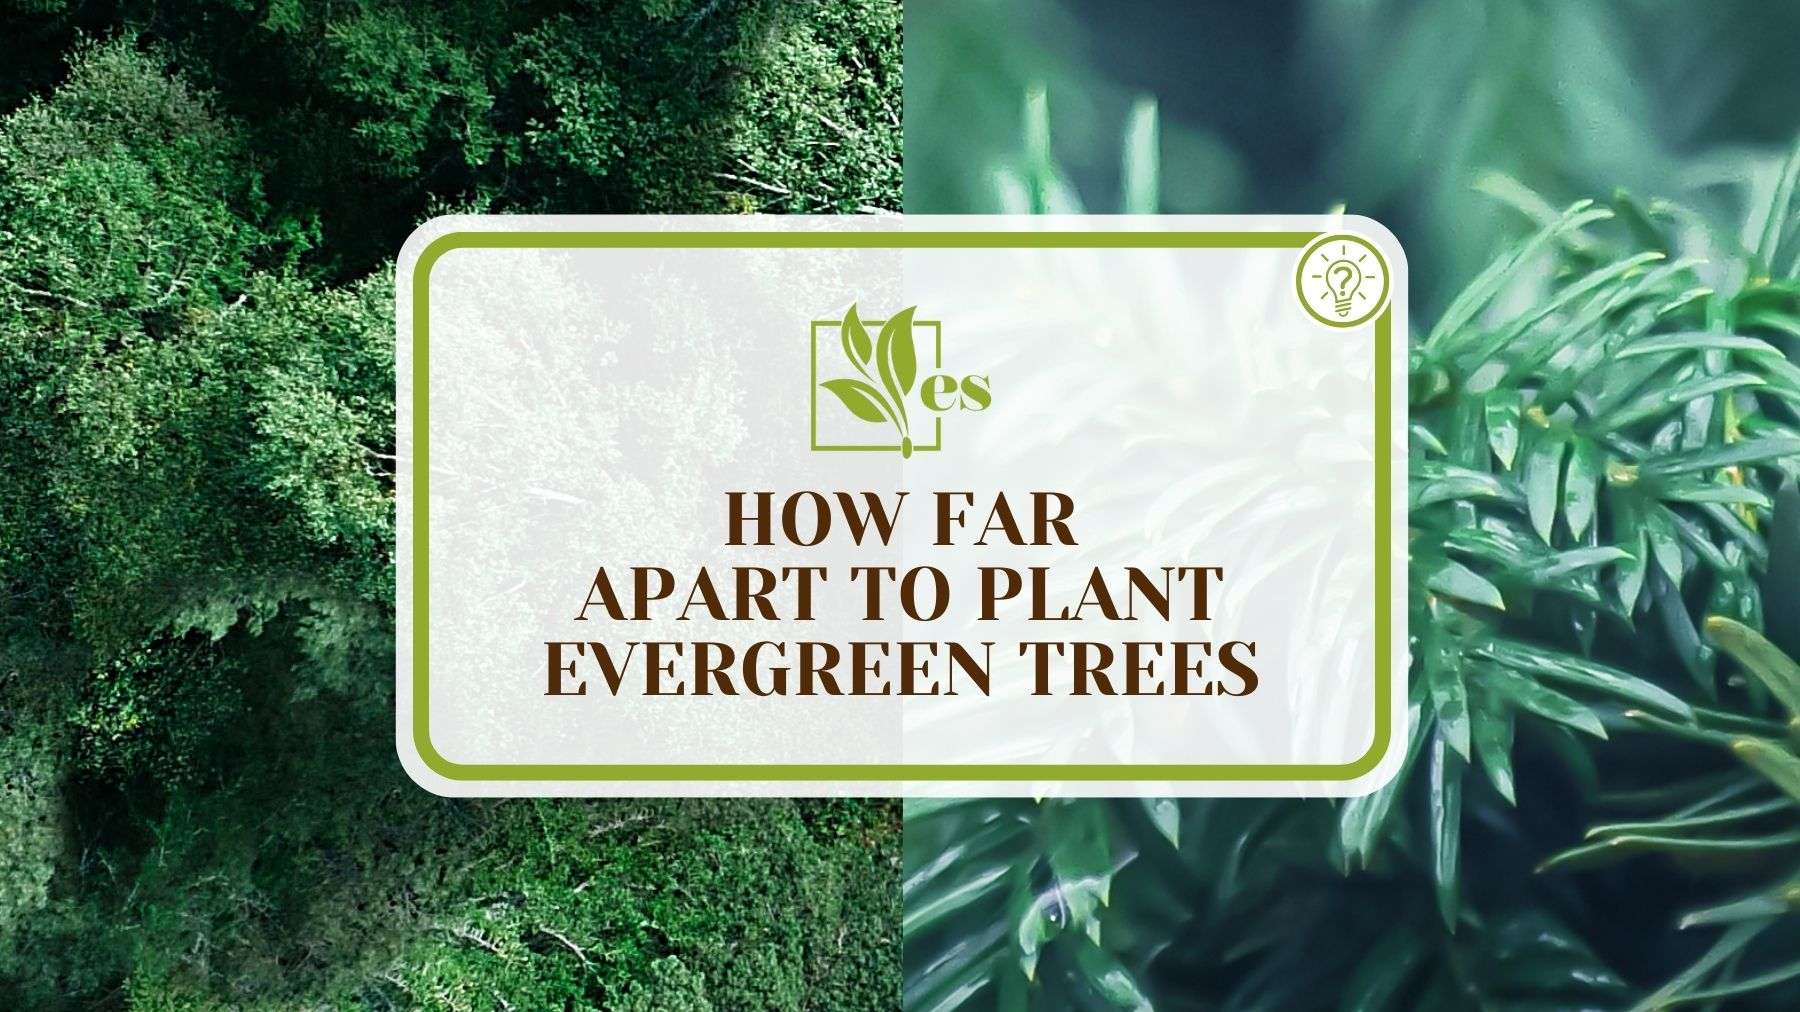 How Far Apart to Plant Evergreen Trees